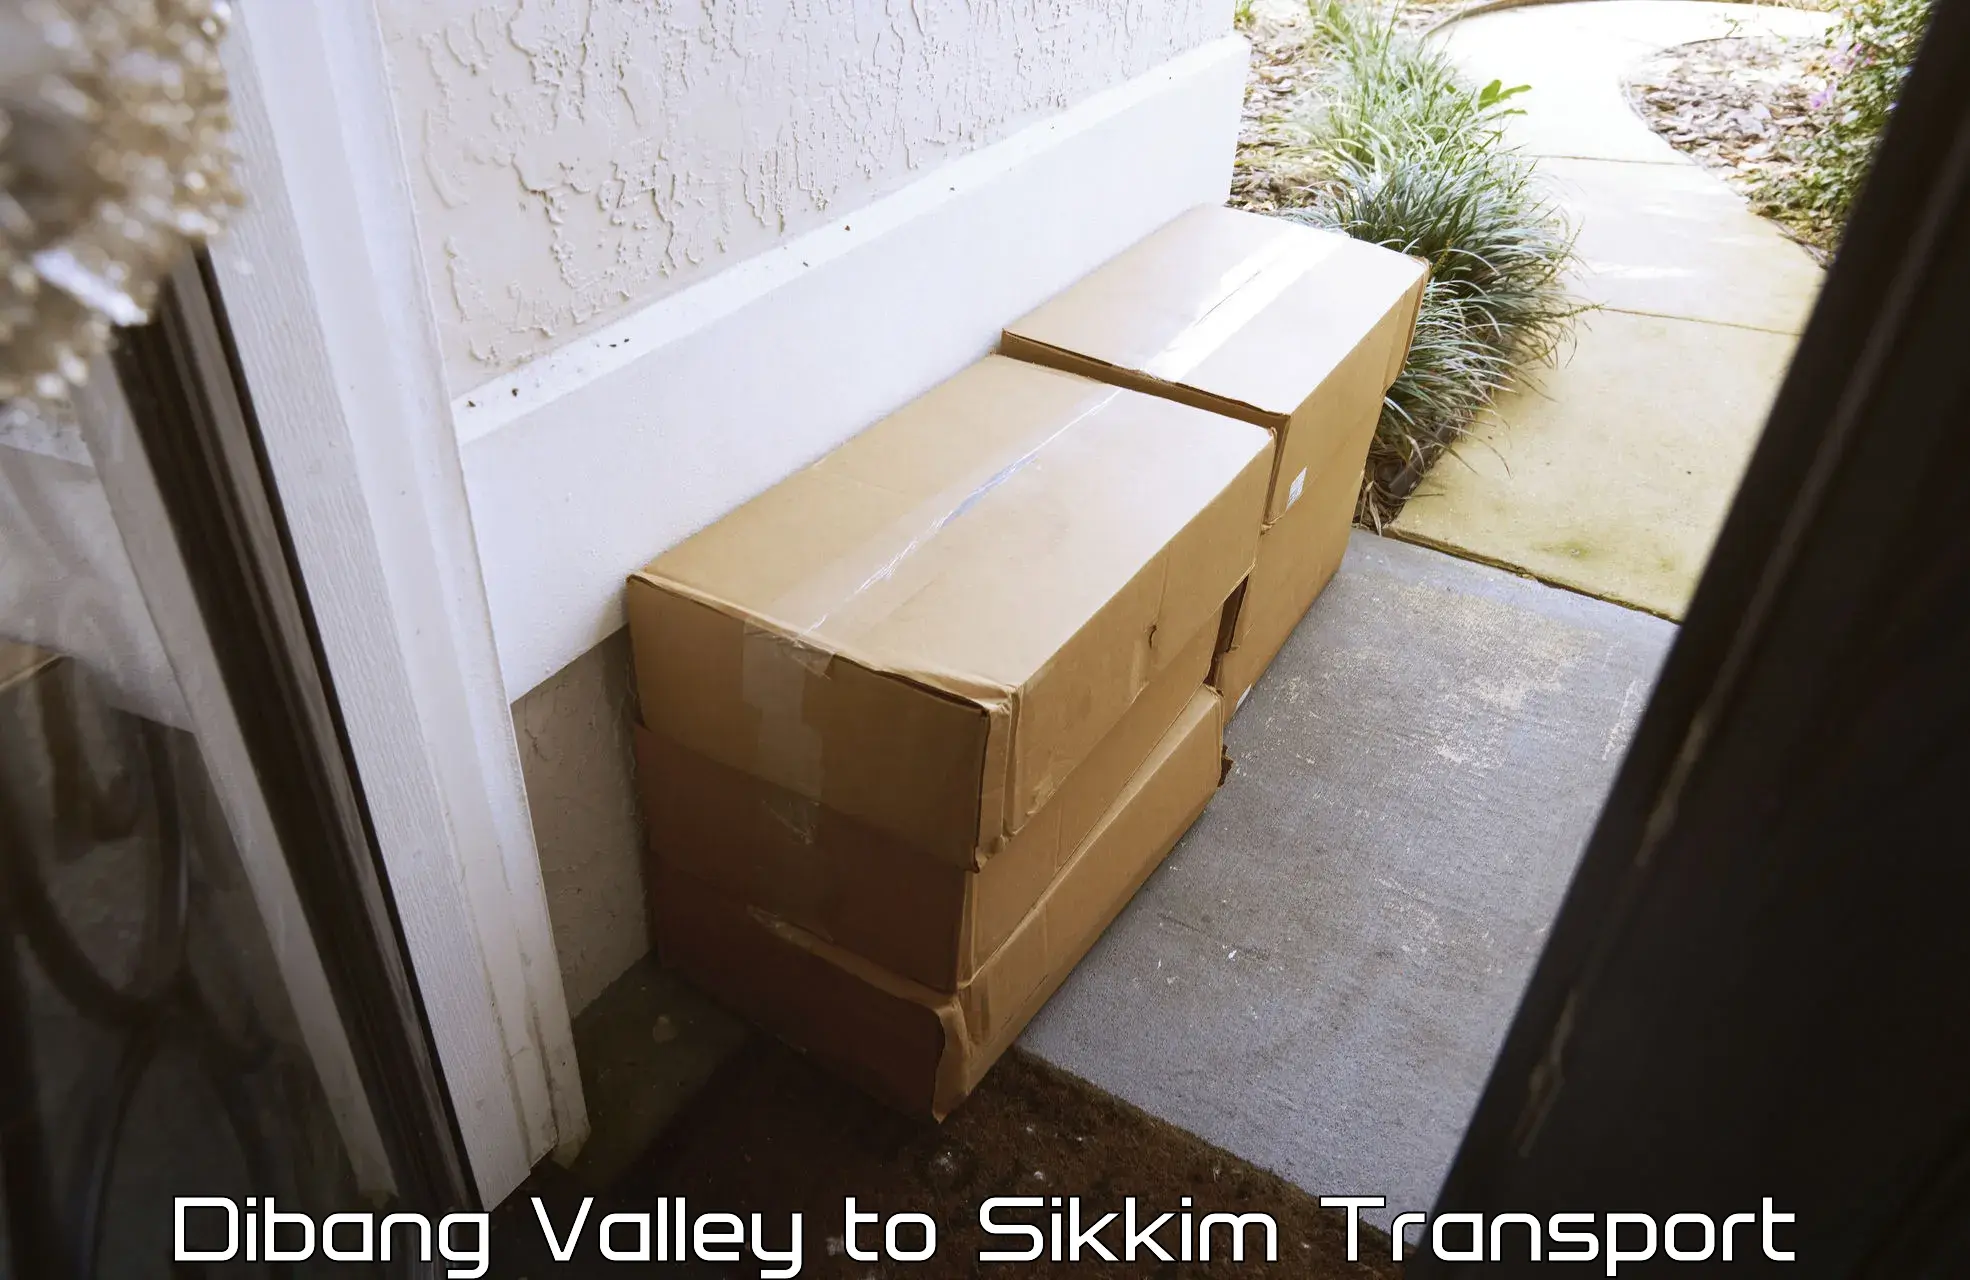 Shipping services Dibang Valley to East Sikkim